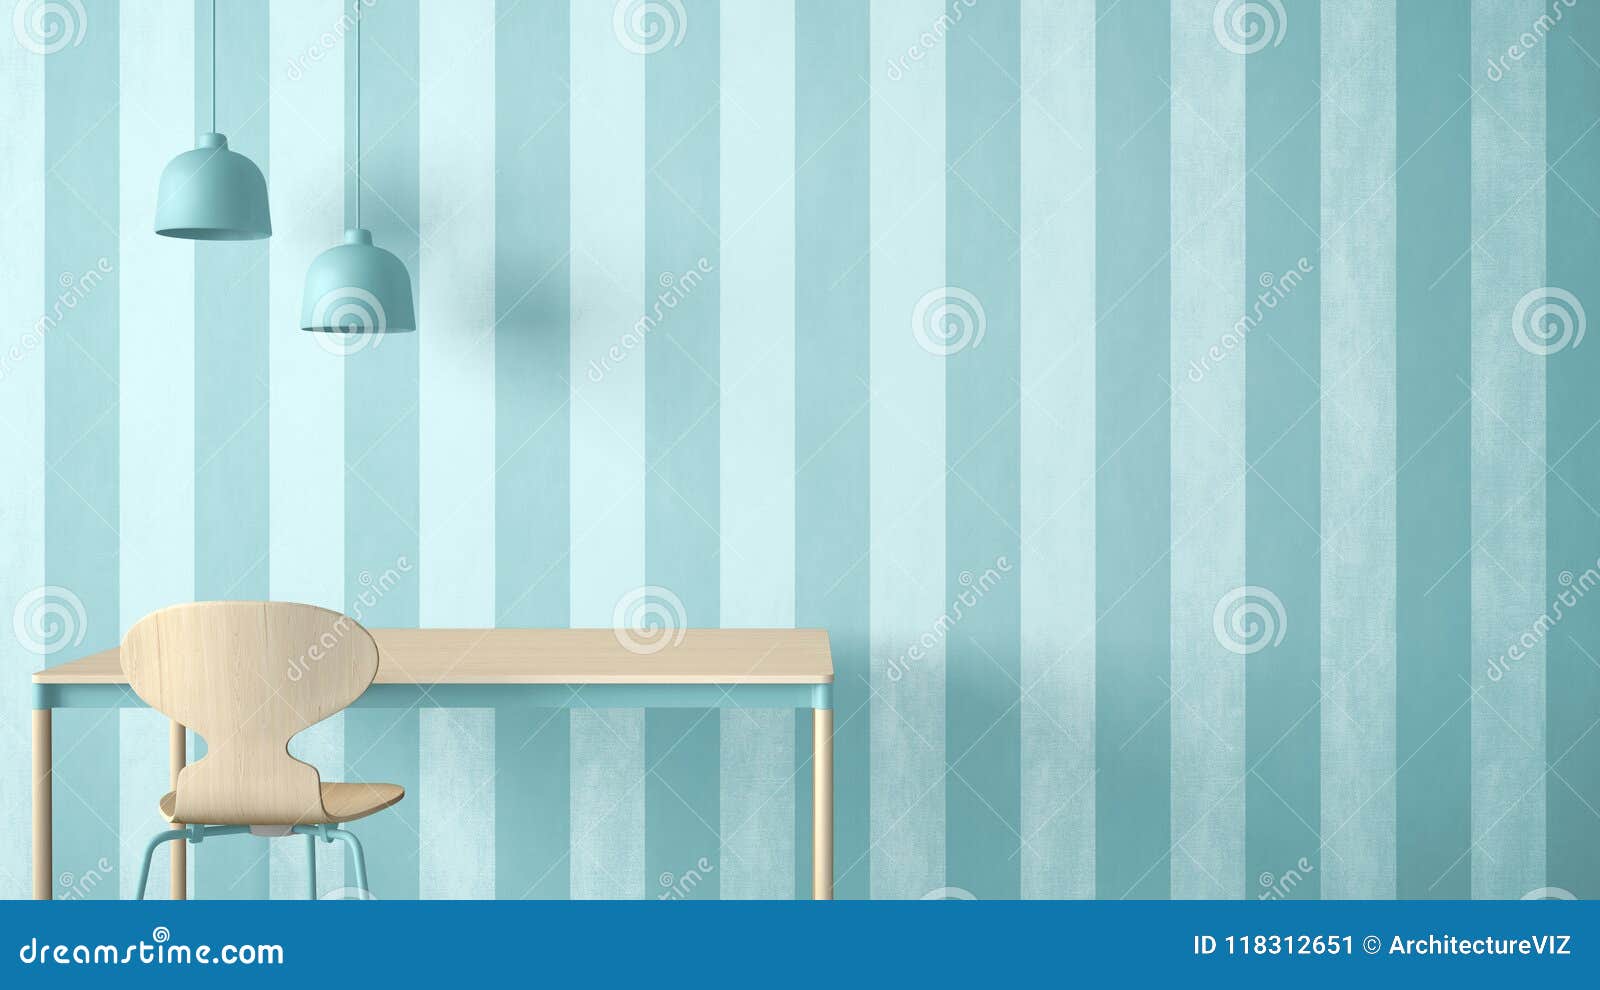 Minimalist Architect Designer Concept, Table Desk and Chair, Kitchen or  Office with Lamps on Striped Wallpaper Background, Blue Pa Stock  Illustration - Illustration of empty, dining: 118312651